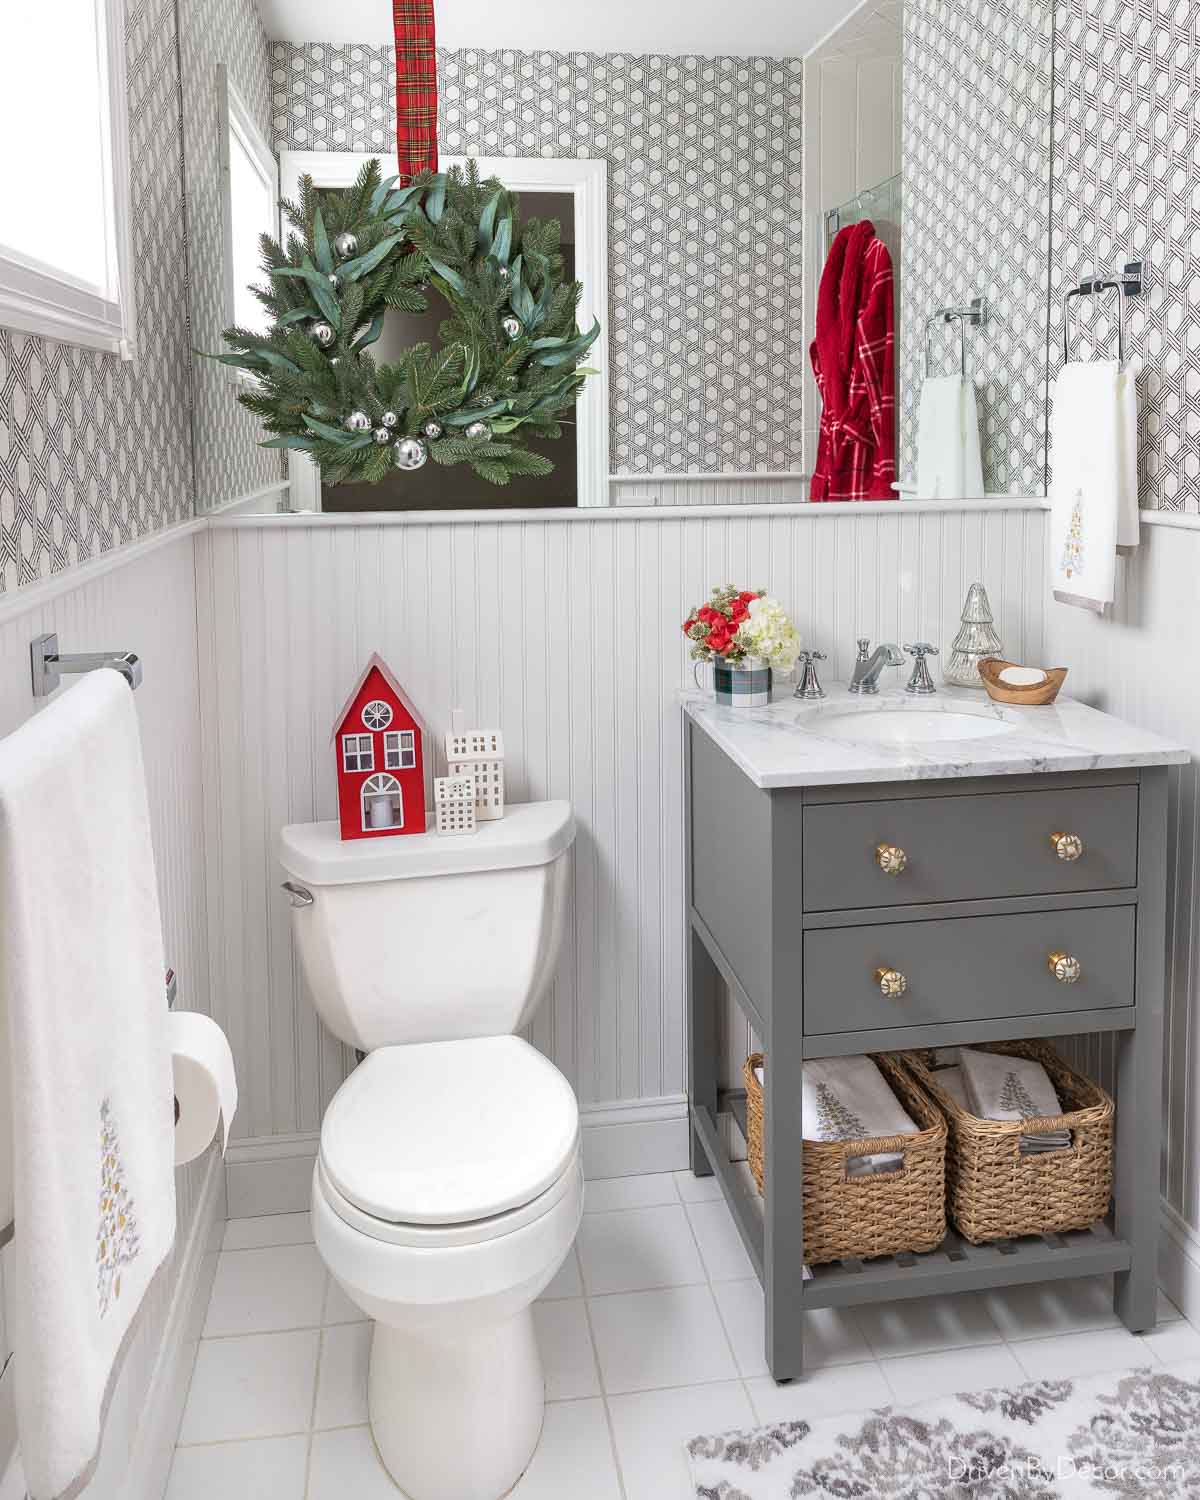 Love the look of a wreath hung on the mirror in this cute guest bathroom!